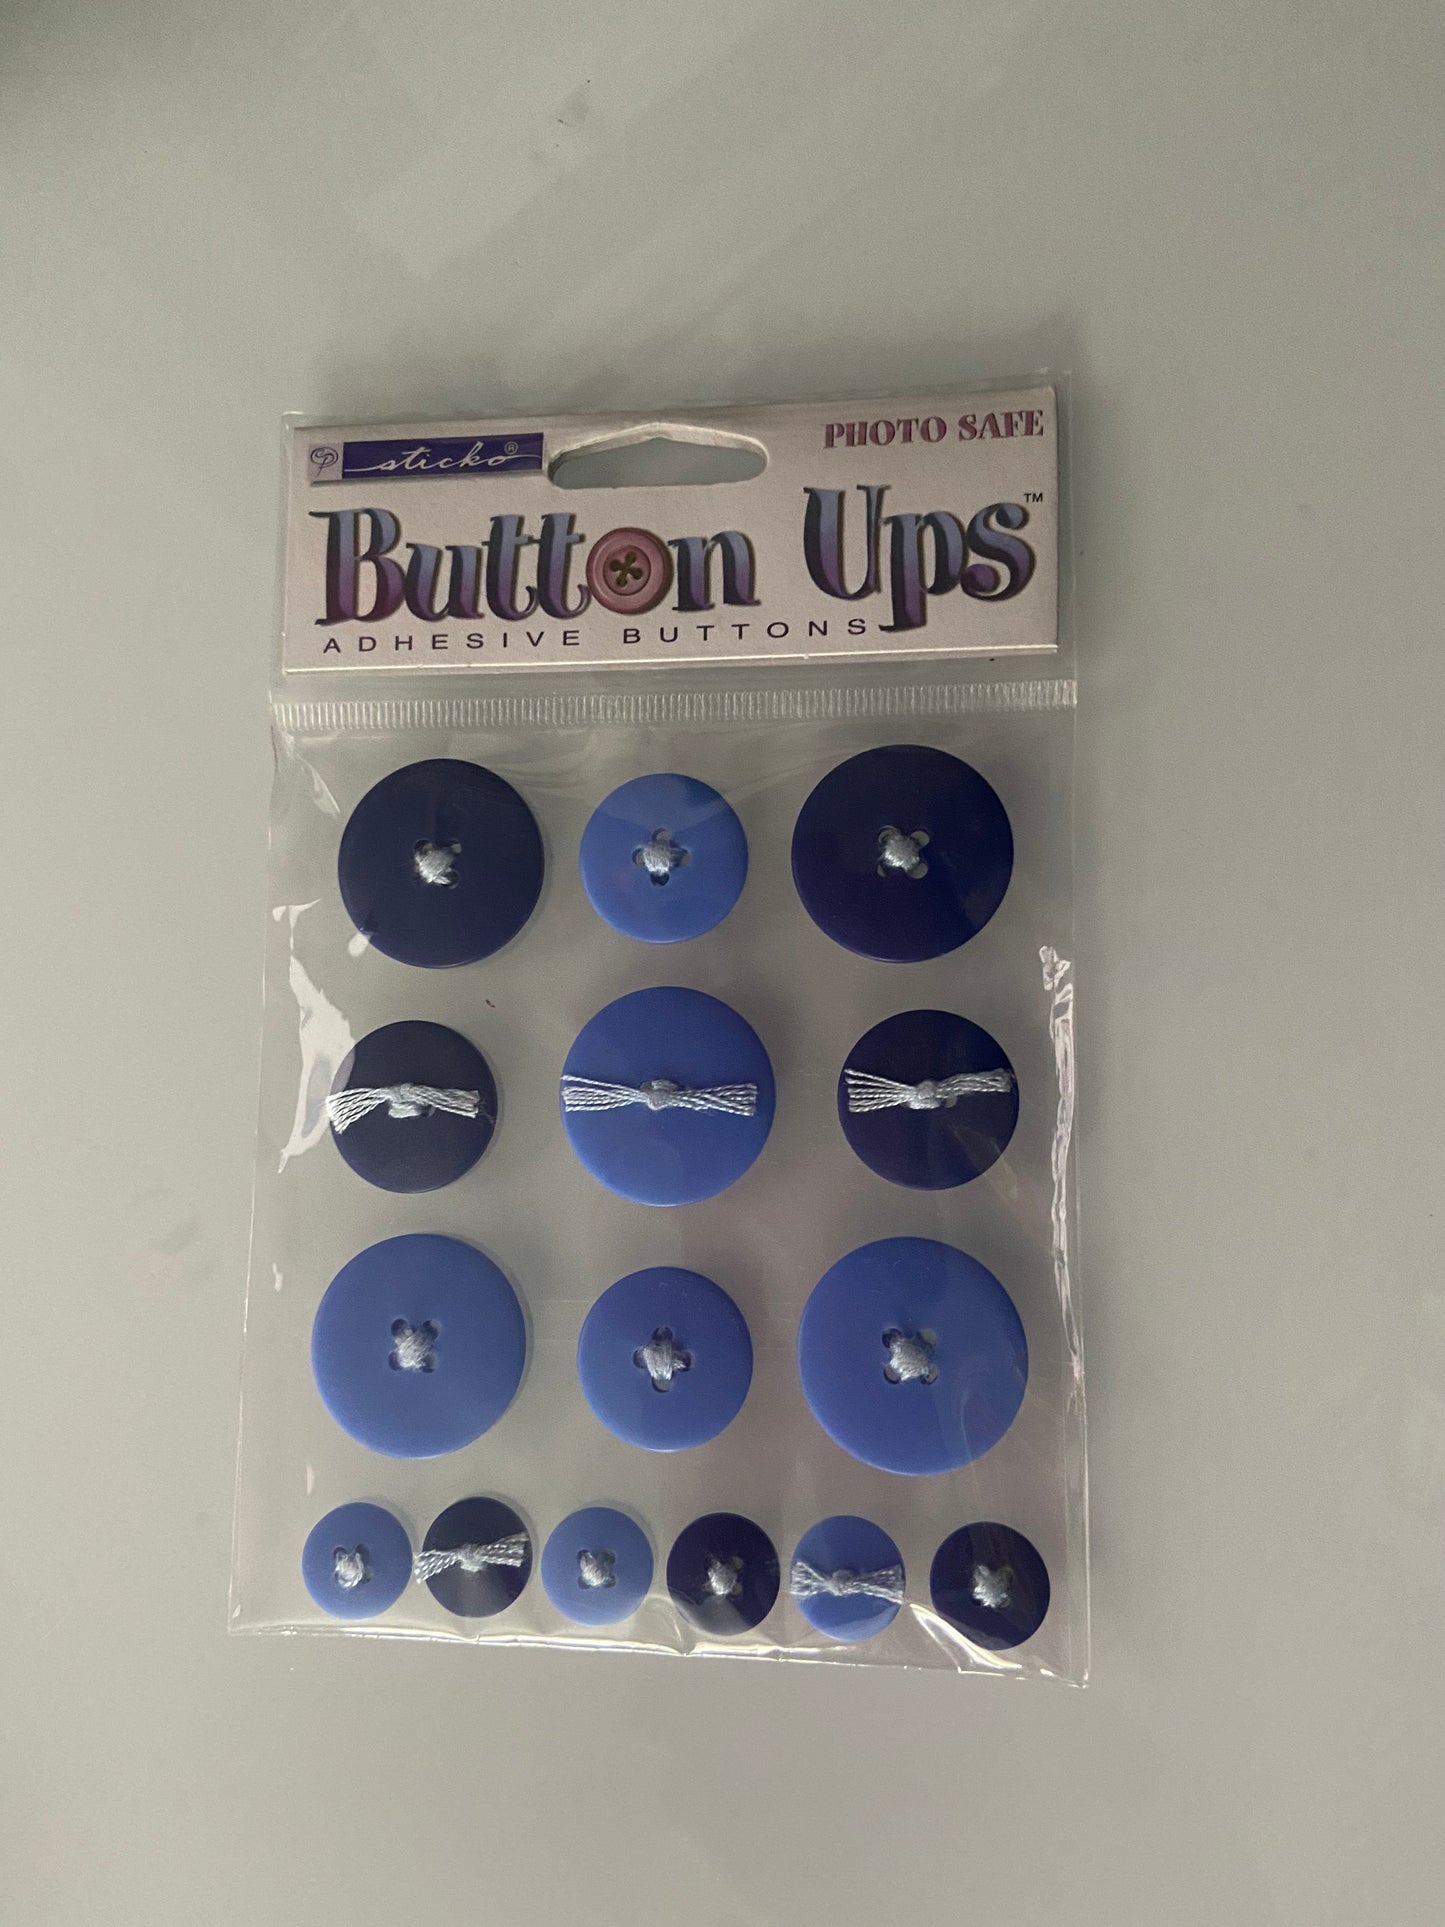 Sticko Button Ups Adhesive Buttons--Garage Sale--